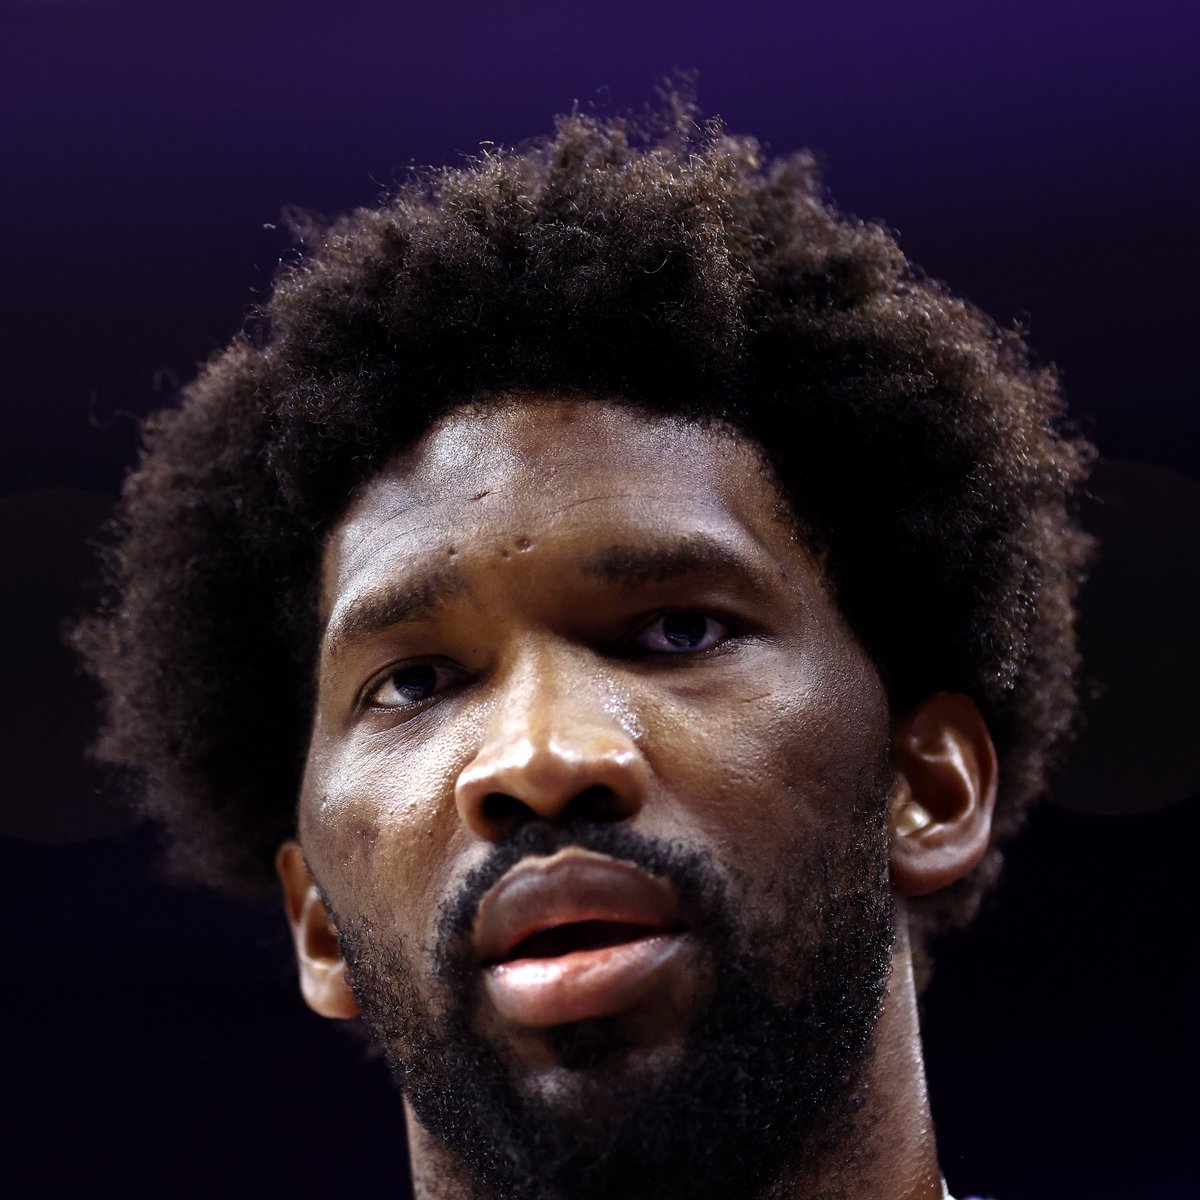 Joel Embiid just logged the 11th postseason loss of his career in which he finished with a positive plus-minus. It has happened in all 3 losses of Sixers-Knicks. The Sixers are now a +34 with Embiid in 161 minutes on the floor and -37 without him in 31 minutes this series.